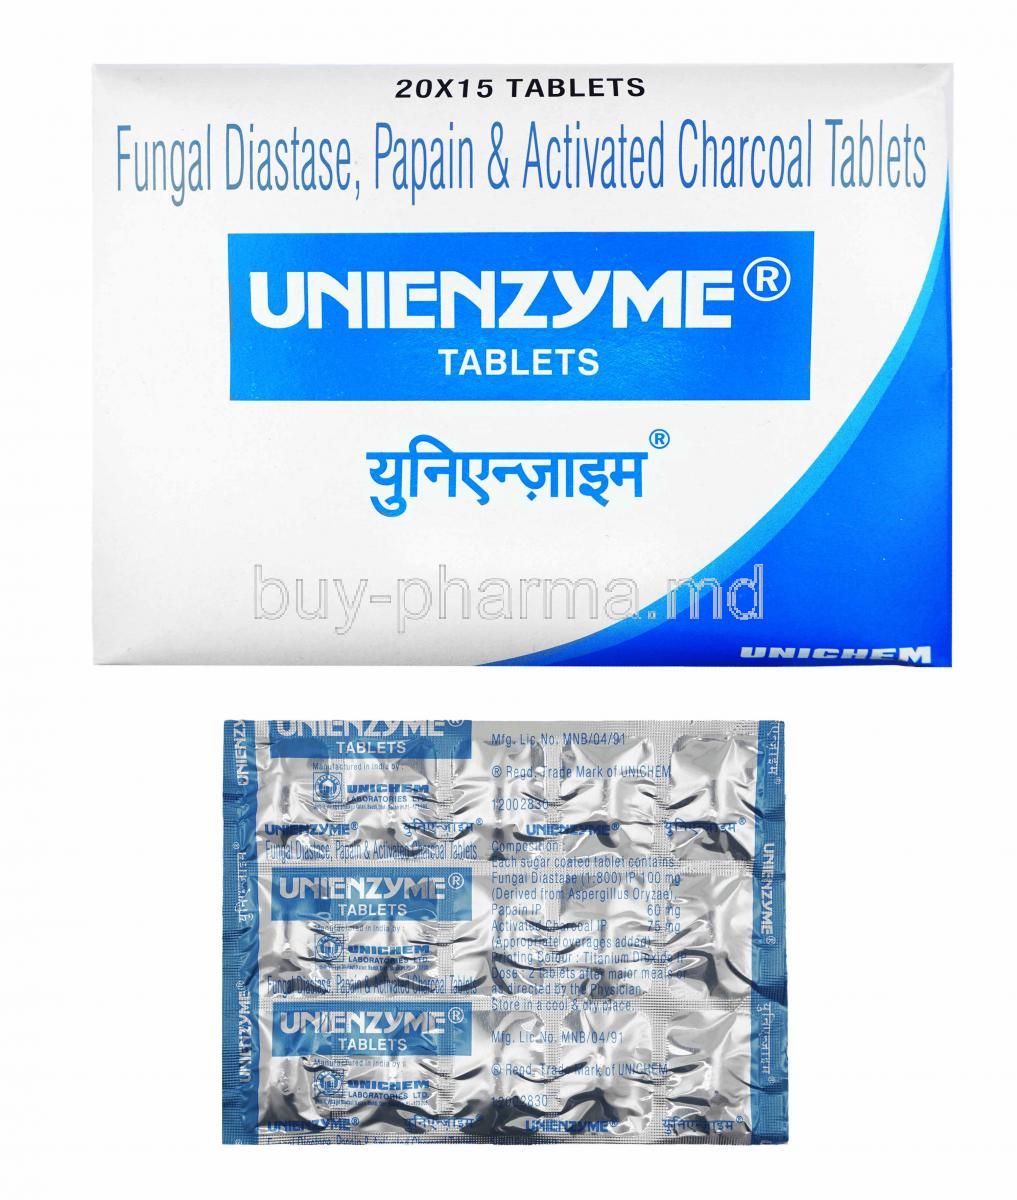 Unienzyme, Fungal Diastase. Papain and Activated Chacoal box and tablets